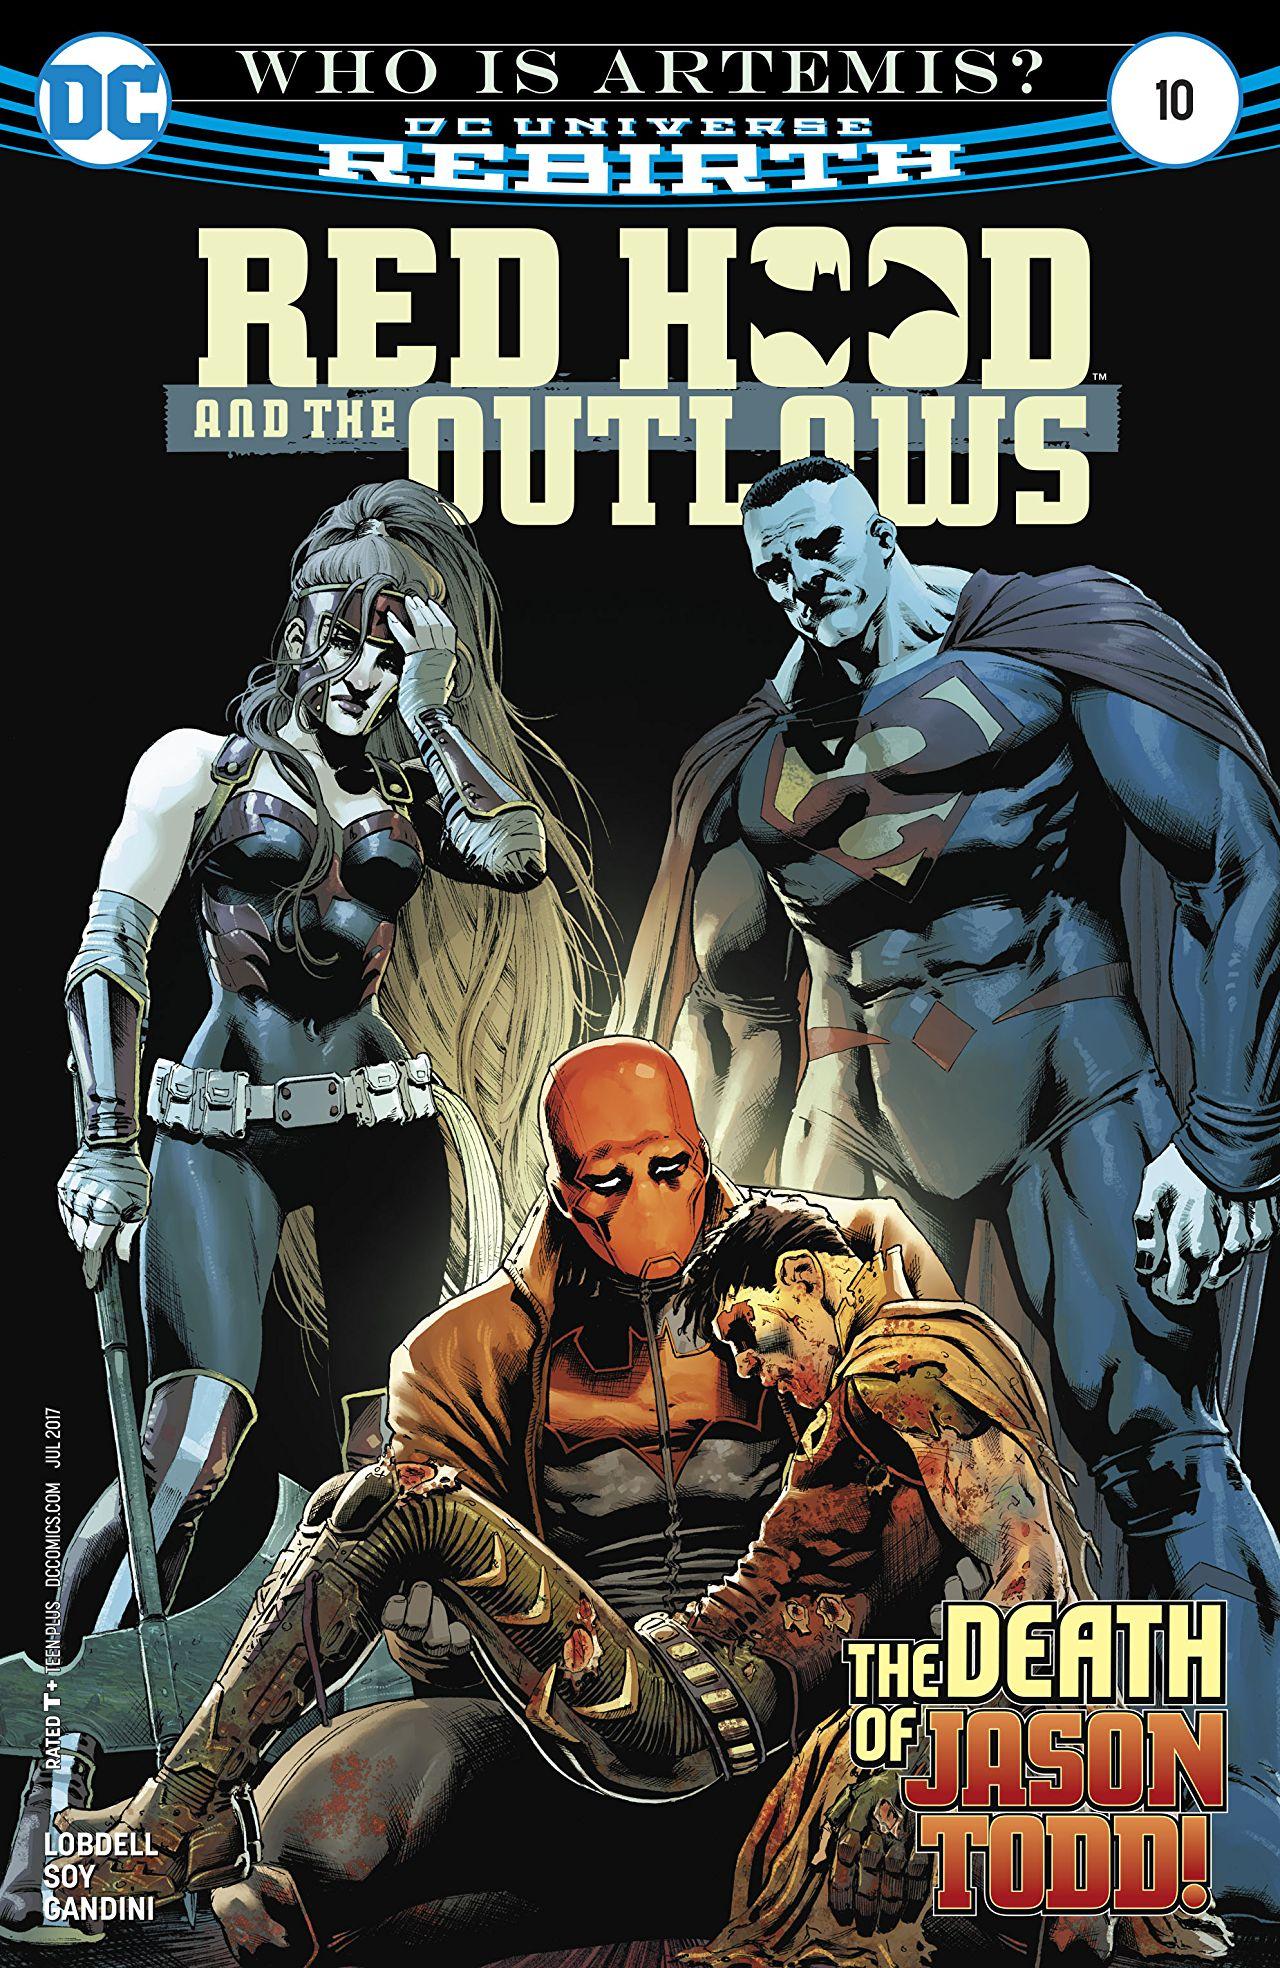 Red Hood and the Outlaws Vol. 2 #10